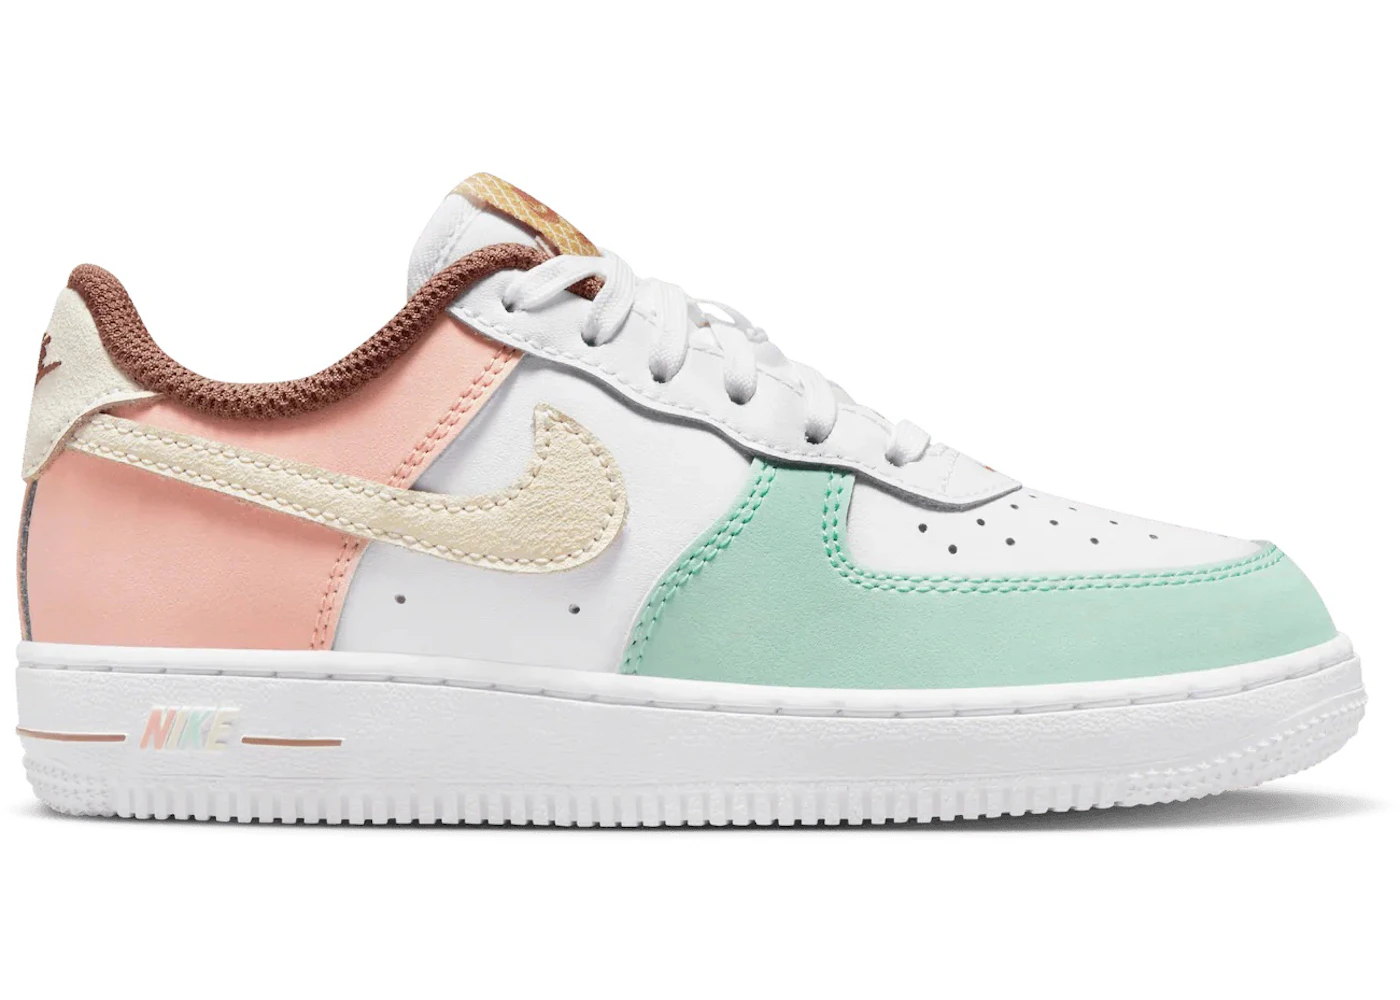 Nike Air Force 1 Low LV8 Ice Cream (PS) Kids' - DX3728-100 - US